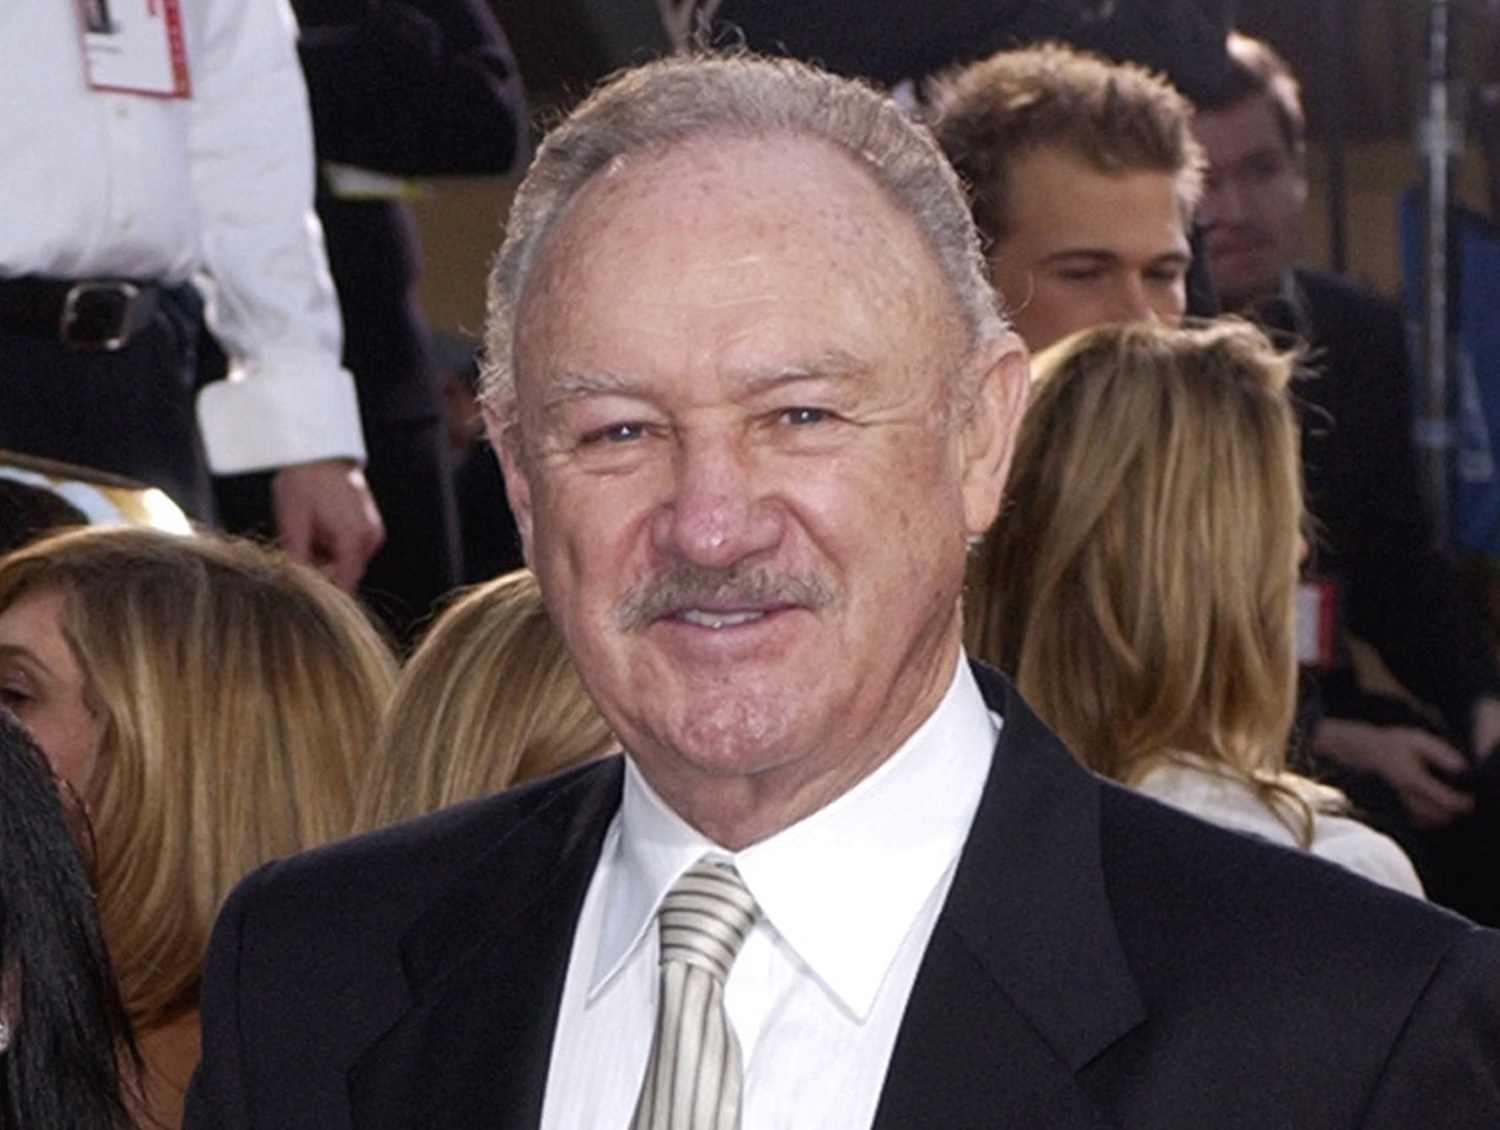 This Jan. 19, 2003 file photo shows actor Gene Hackman at the 60th Annual Golden Globe Awards in Beverly Hills, Calif. (Mark J. Terrill — AP)